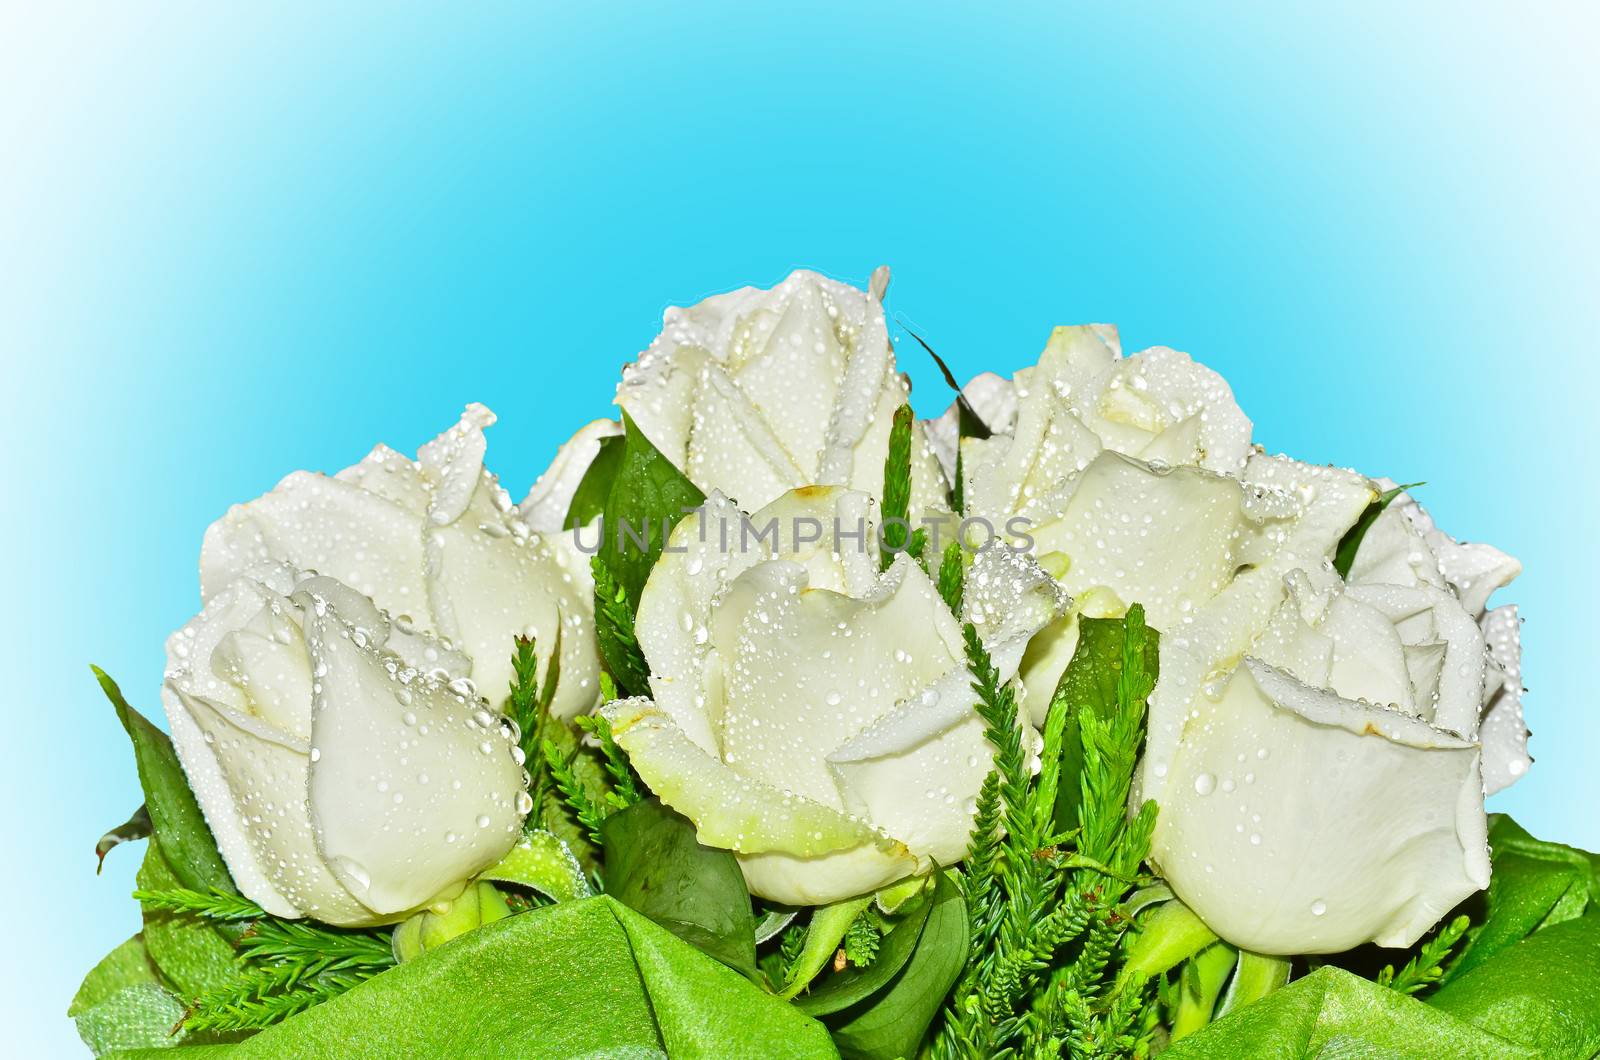 Bouquet of white roses on blue background